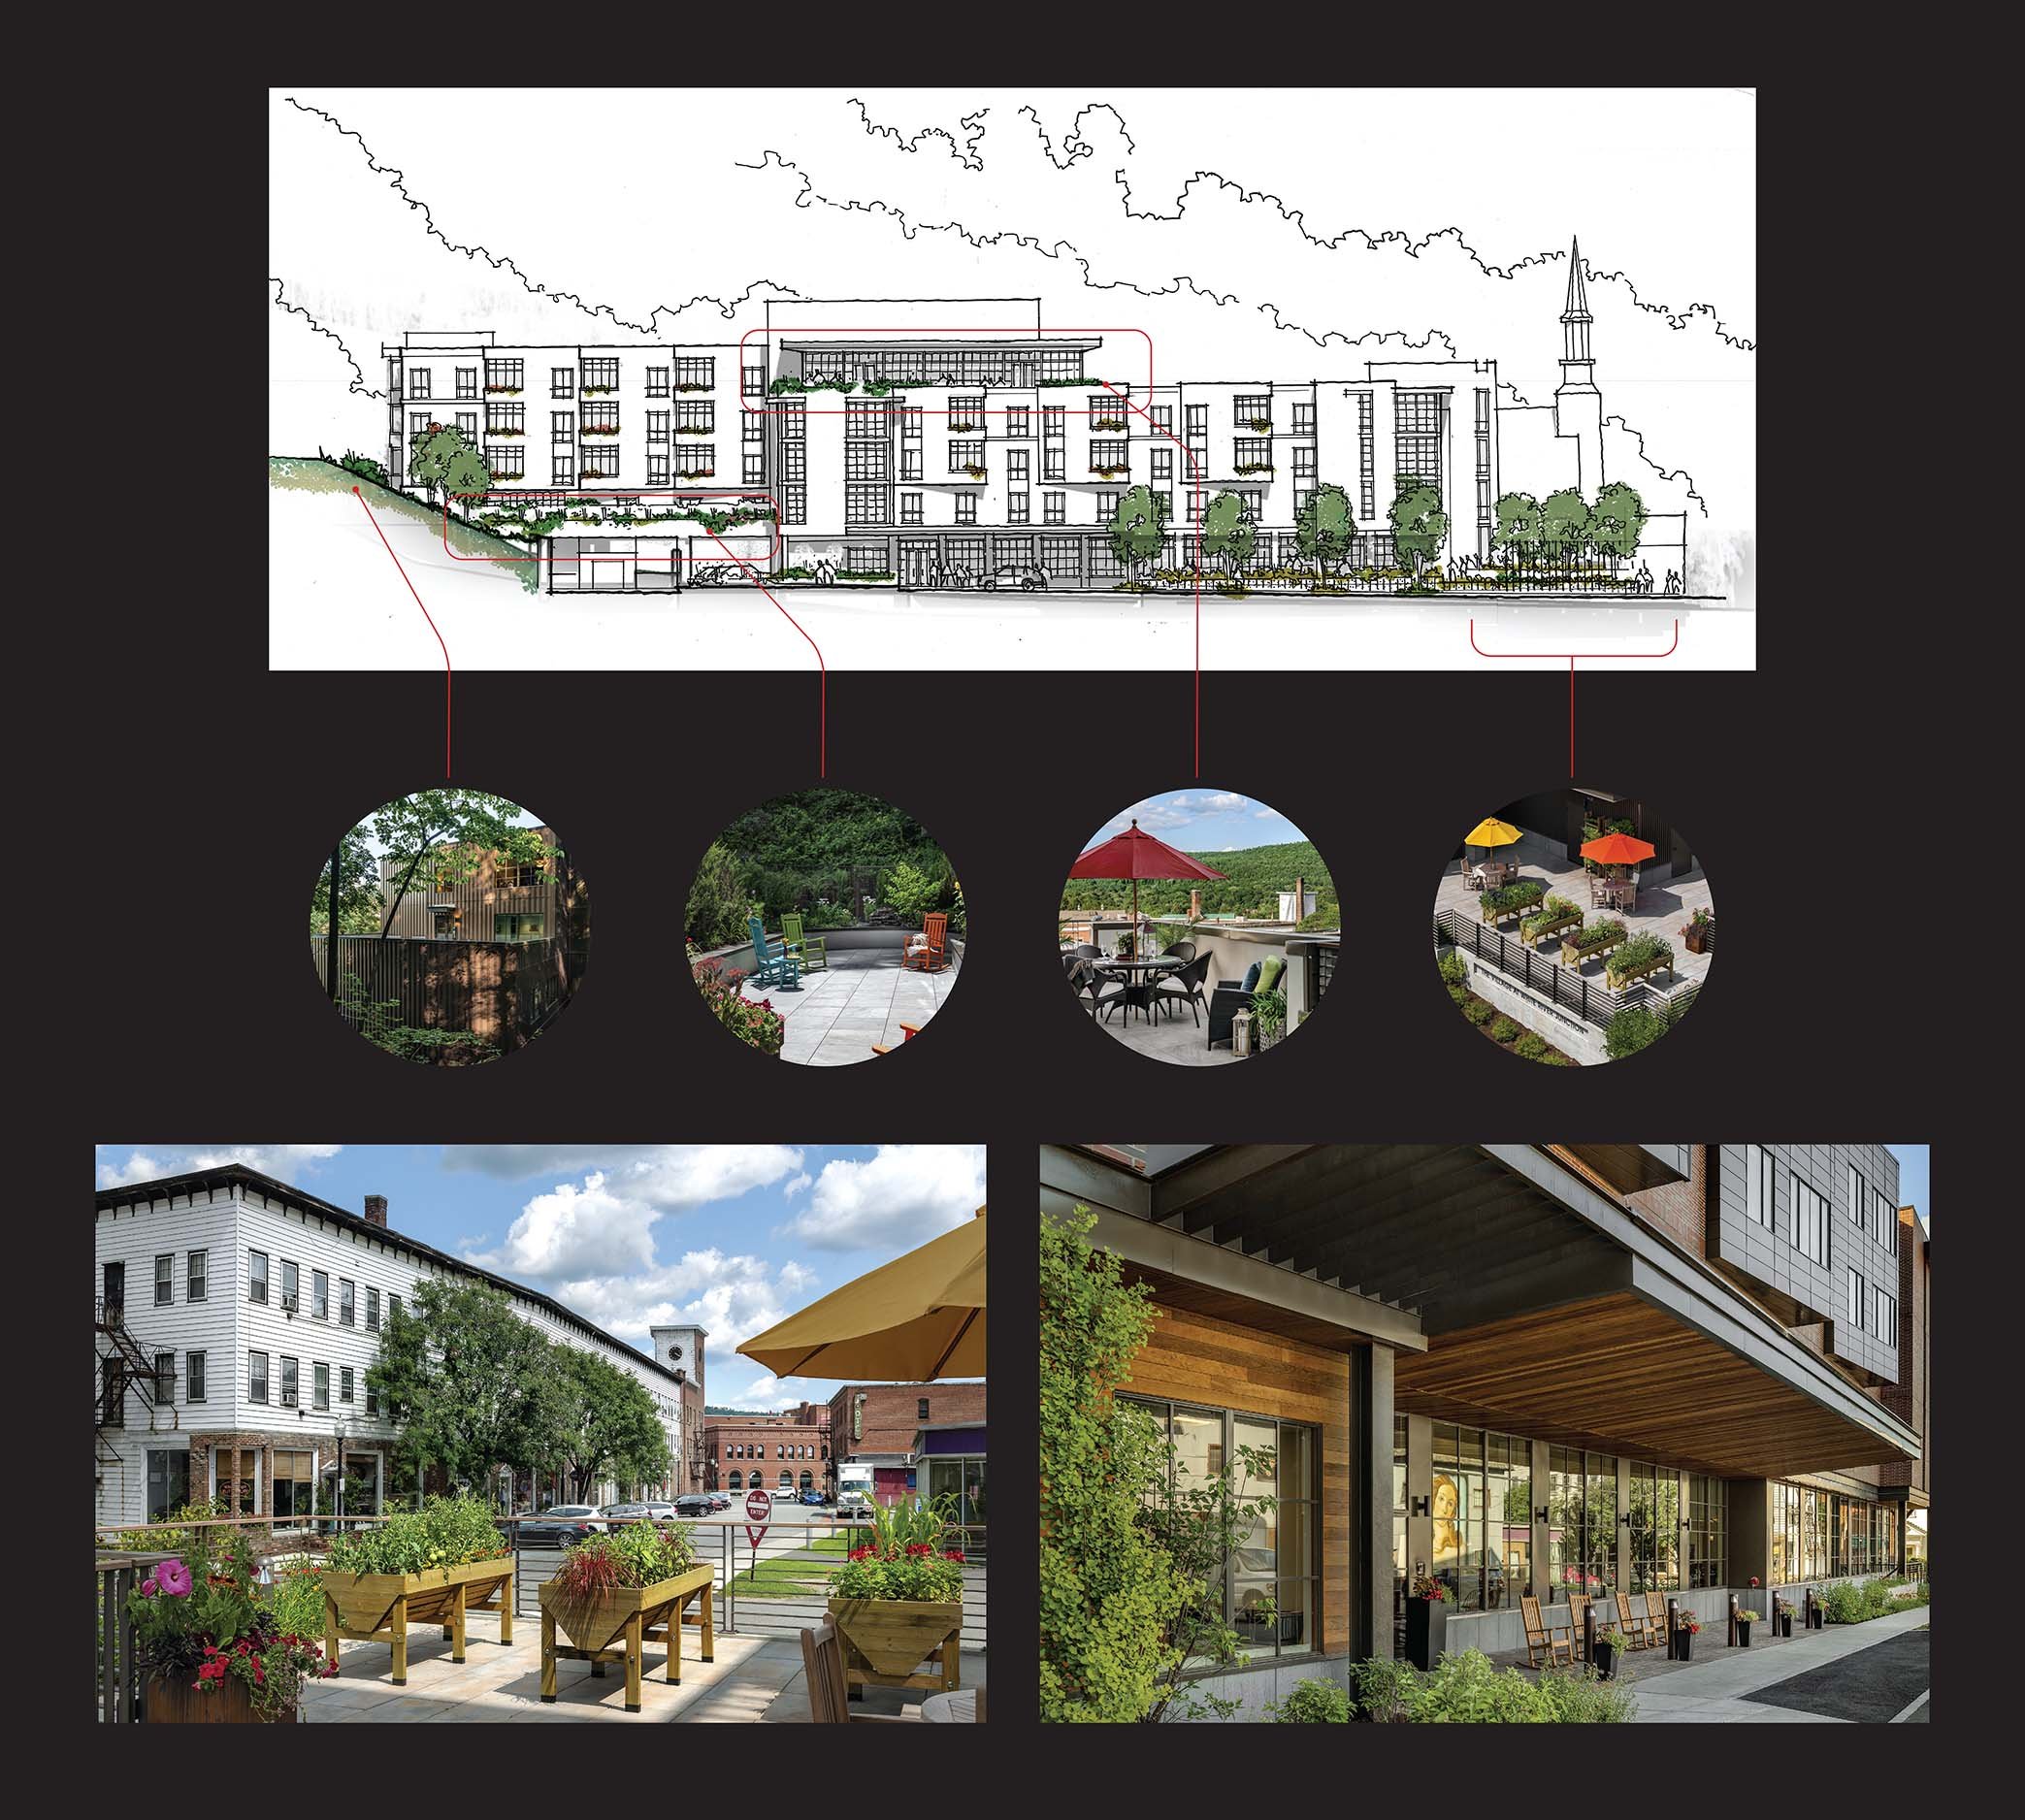 The Village at White River Junction AIA Design for Aging Award Fall 2021